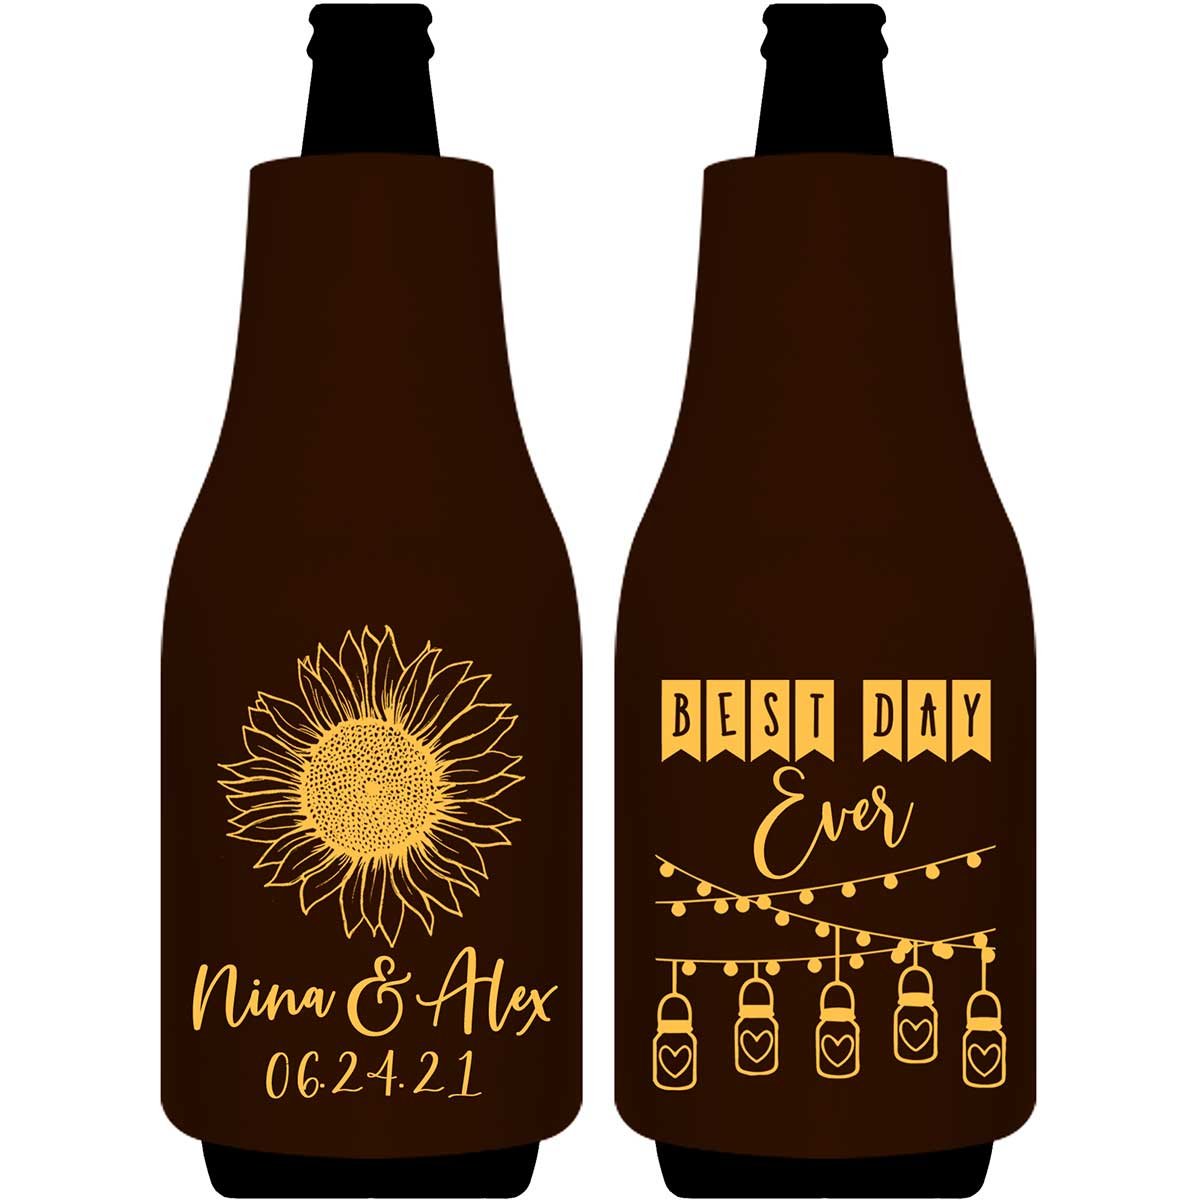 Country Sunflower 1A Best Day Ever Foldable Bottle Sleeve Koozies Wedding Gifts for Guests